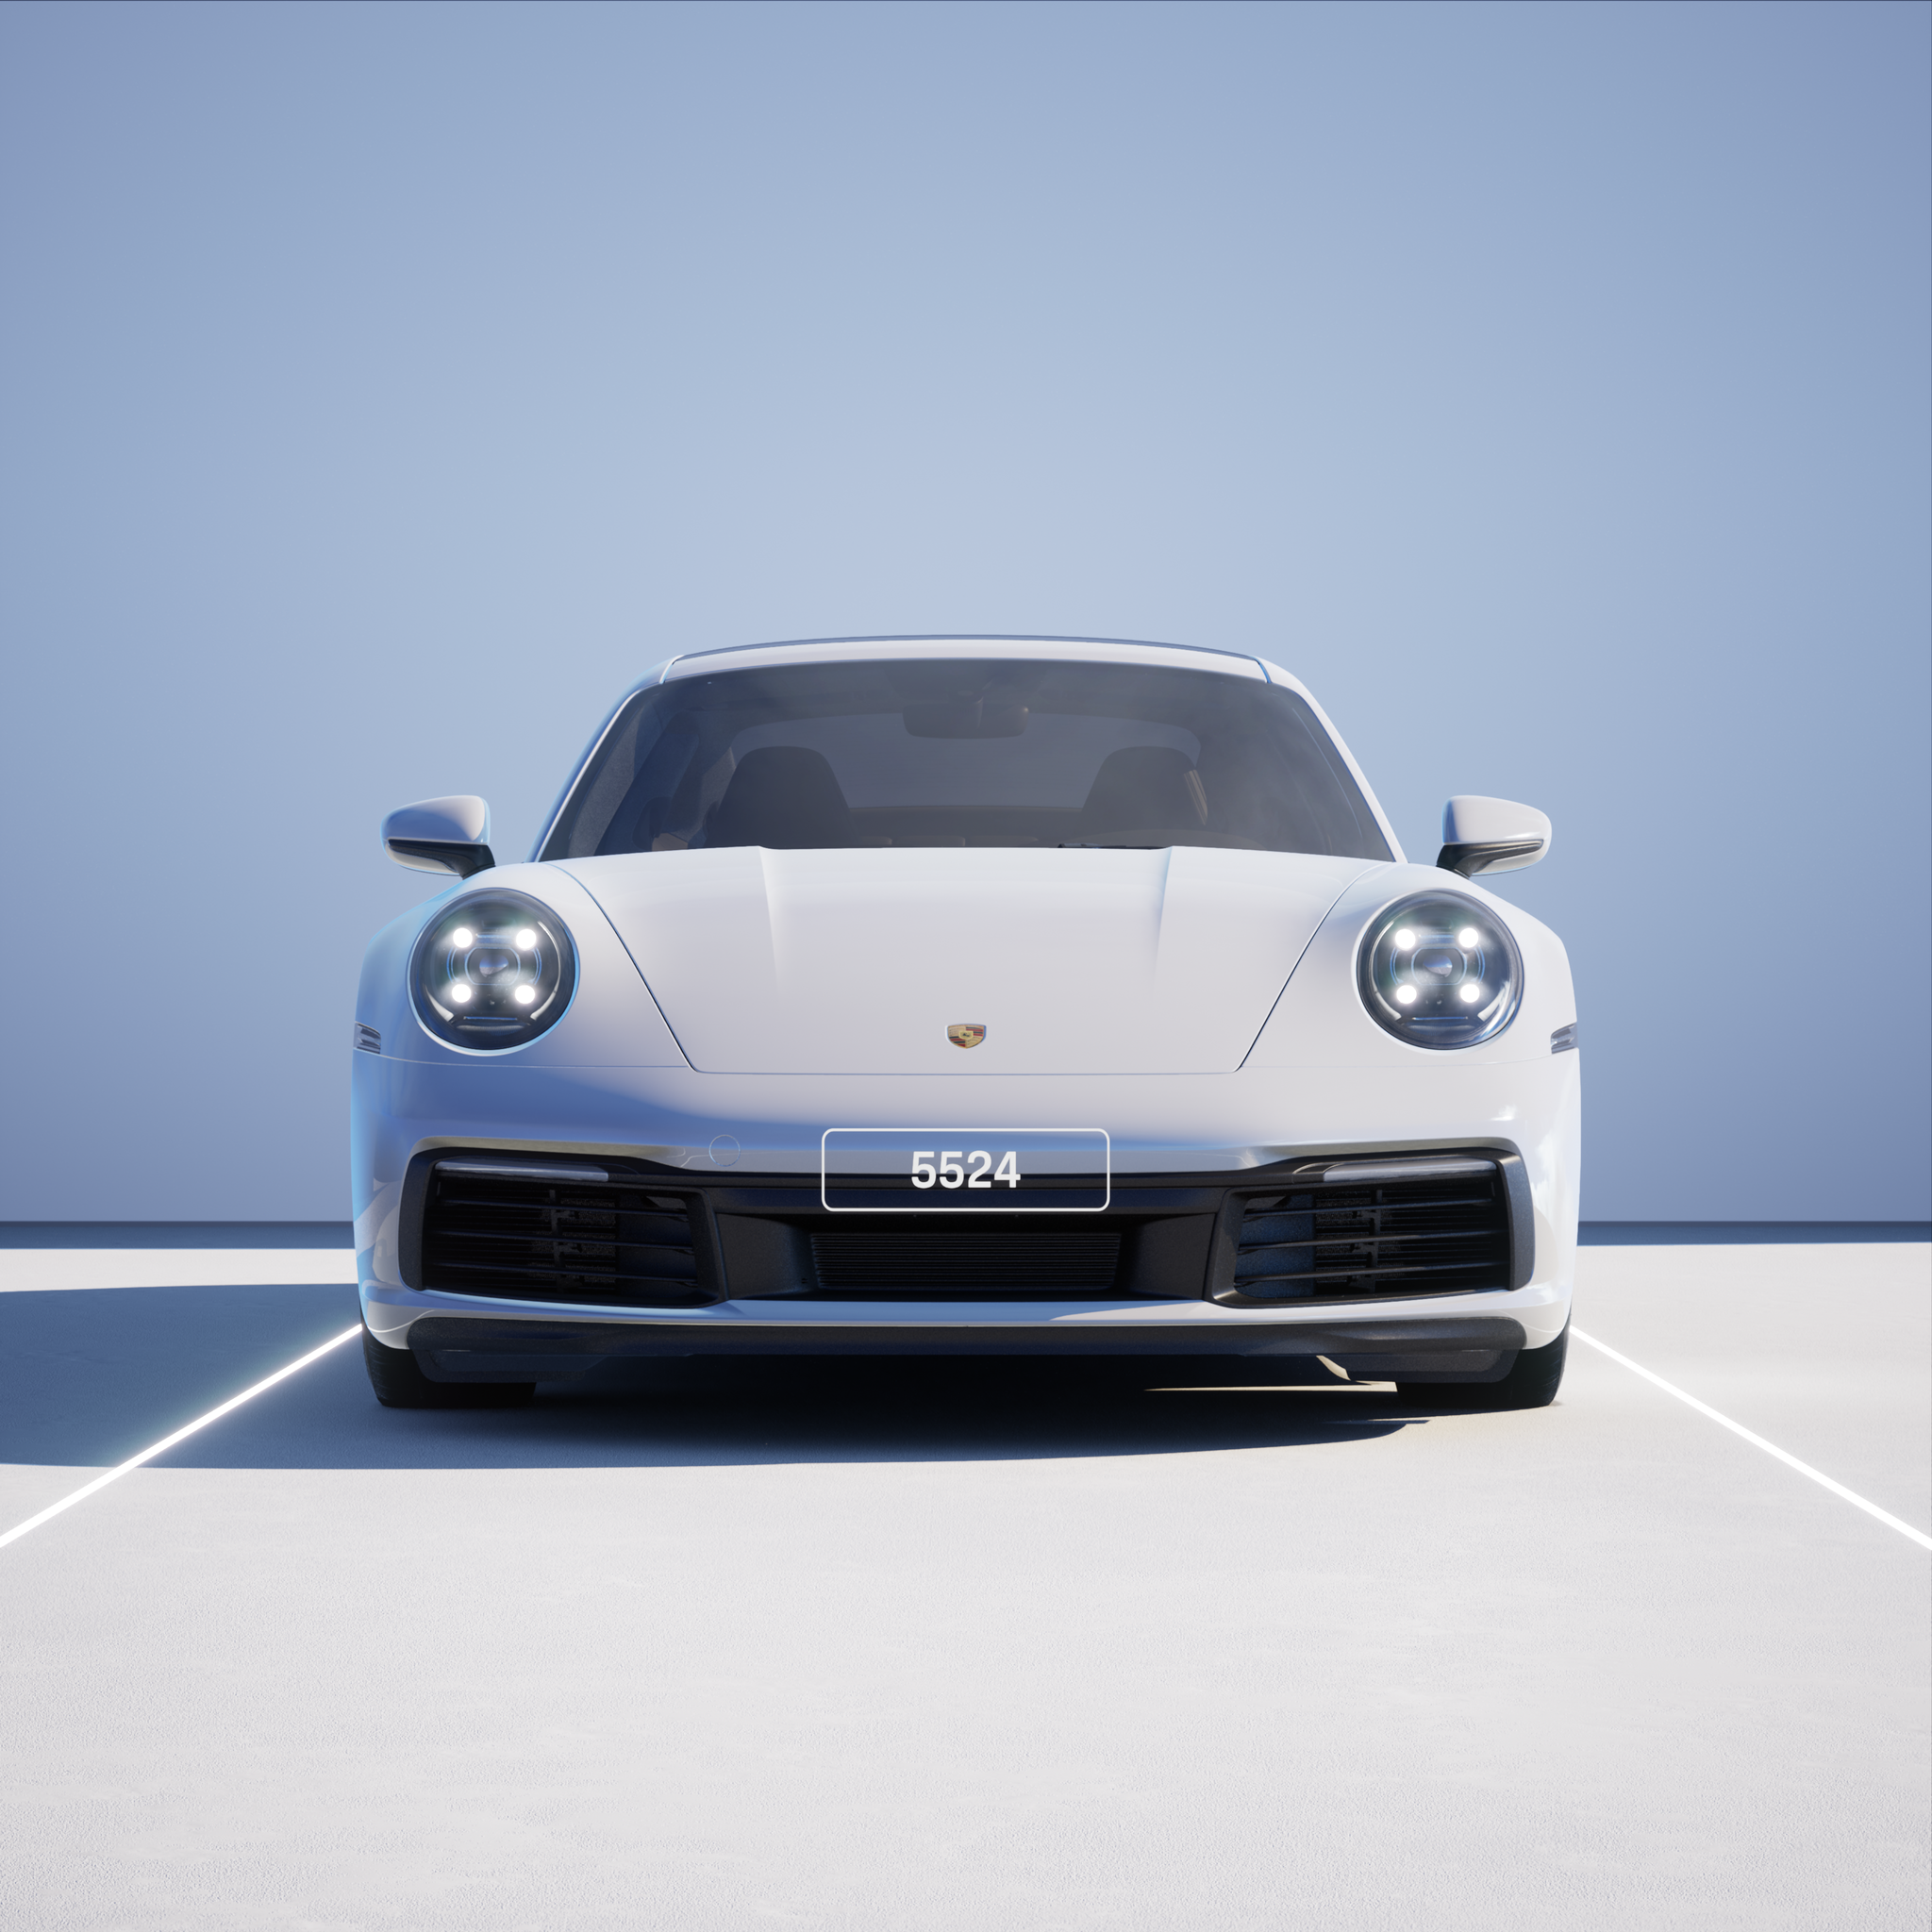 The PORSCHΞ 911 5524 image in phase